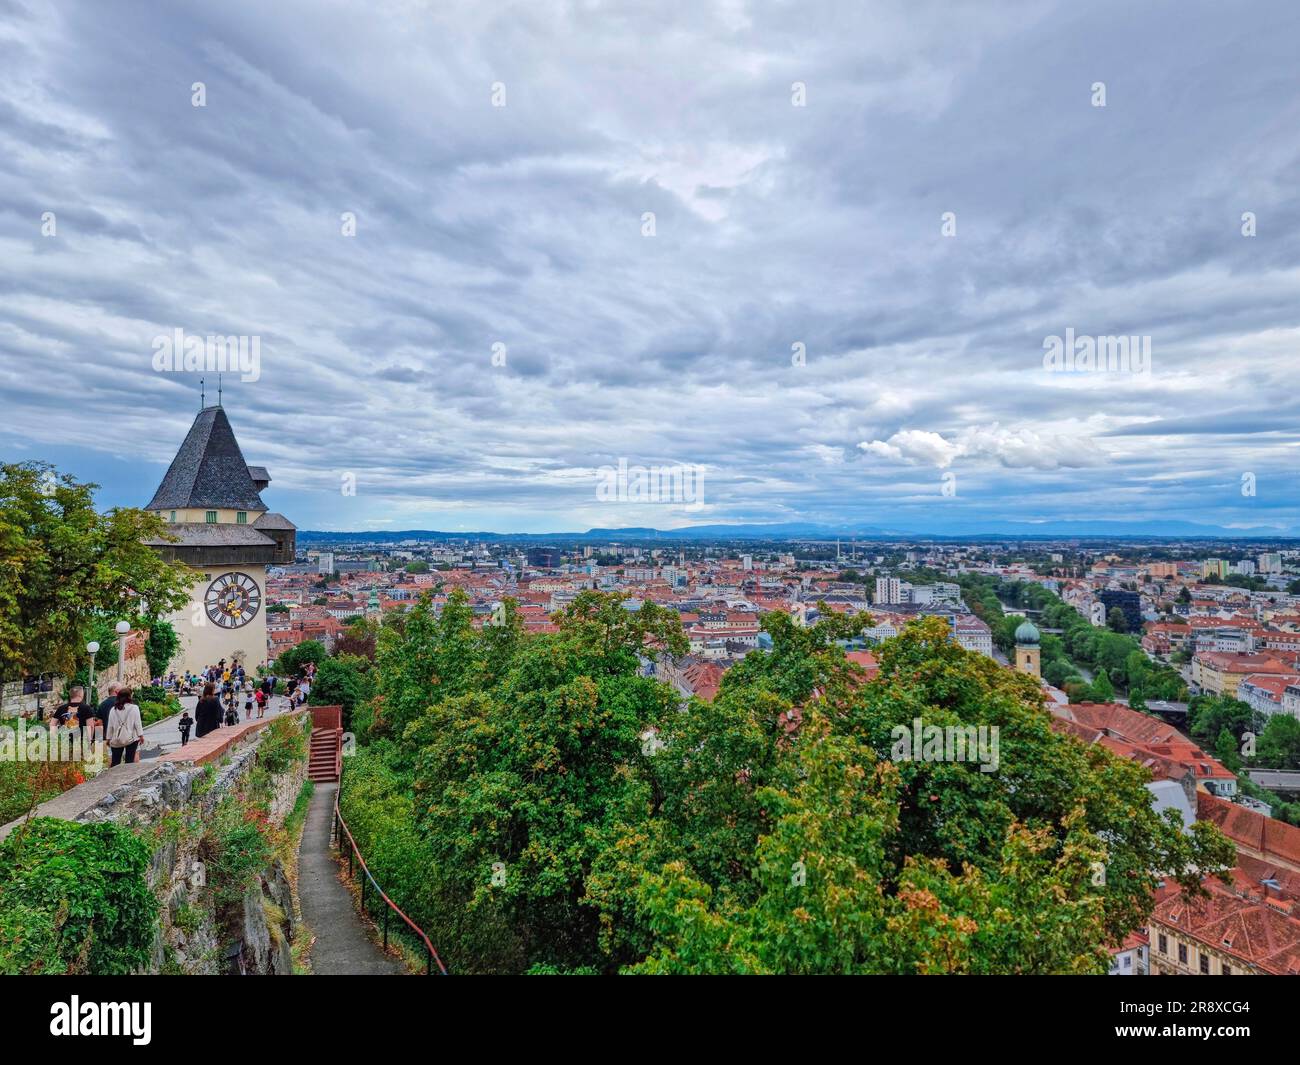 Cityscape of old town of Graz and the Clock Tower (Grazer Uhrturm), famous tourist attraction in Steiermark, Austria, in cloudy day Stock Photo